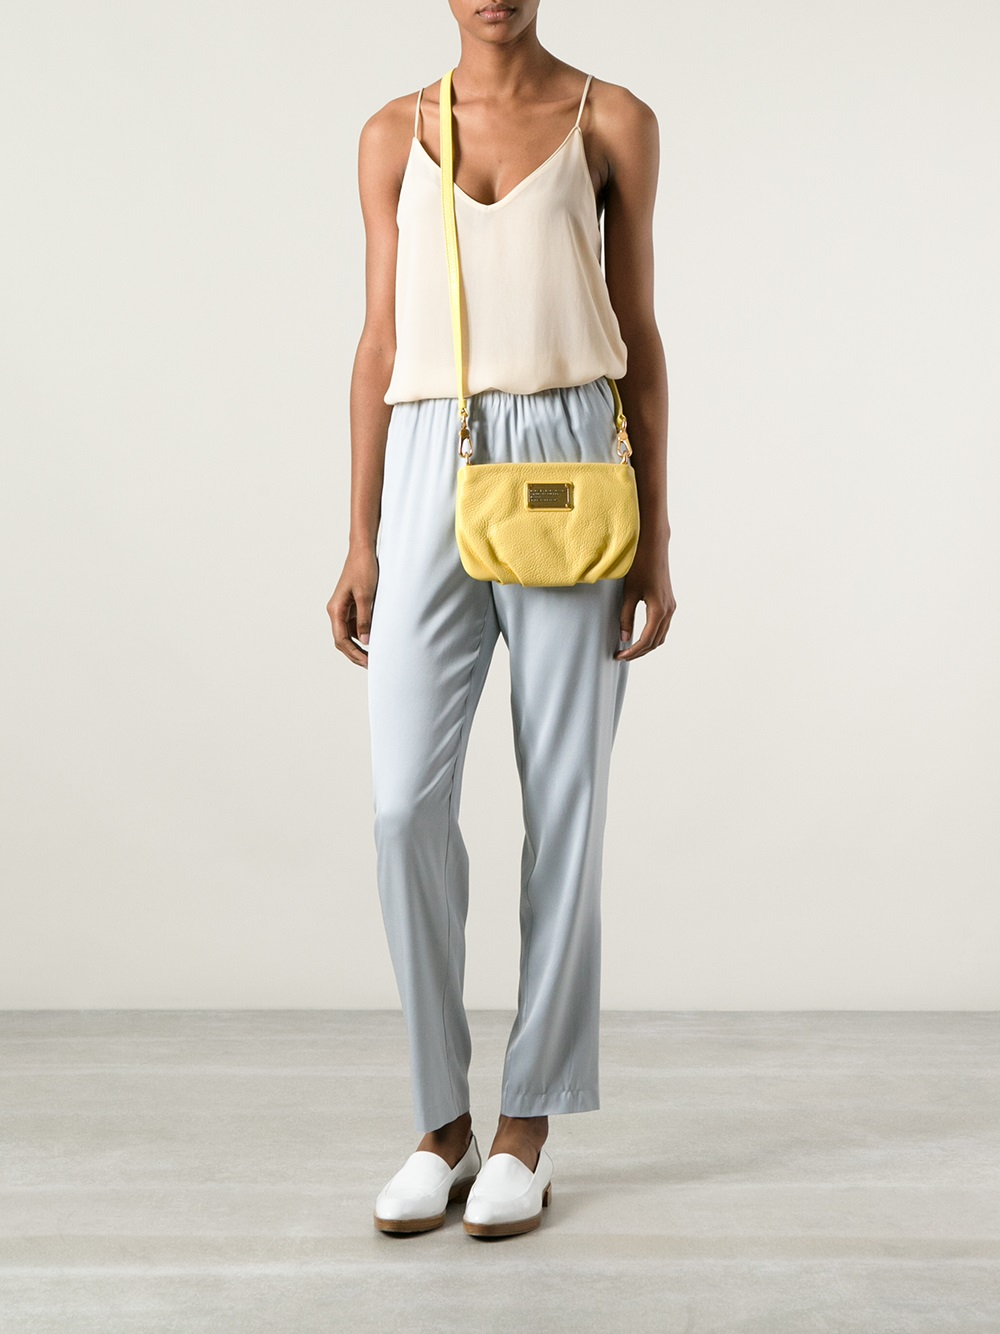 Marc By Marc Jacobs Classic Q Percy Crossbody Bag in Yellow